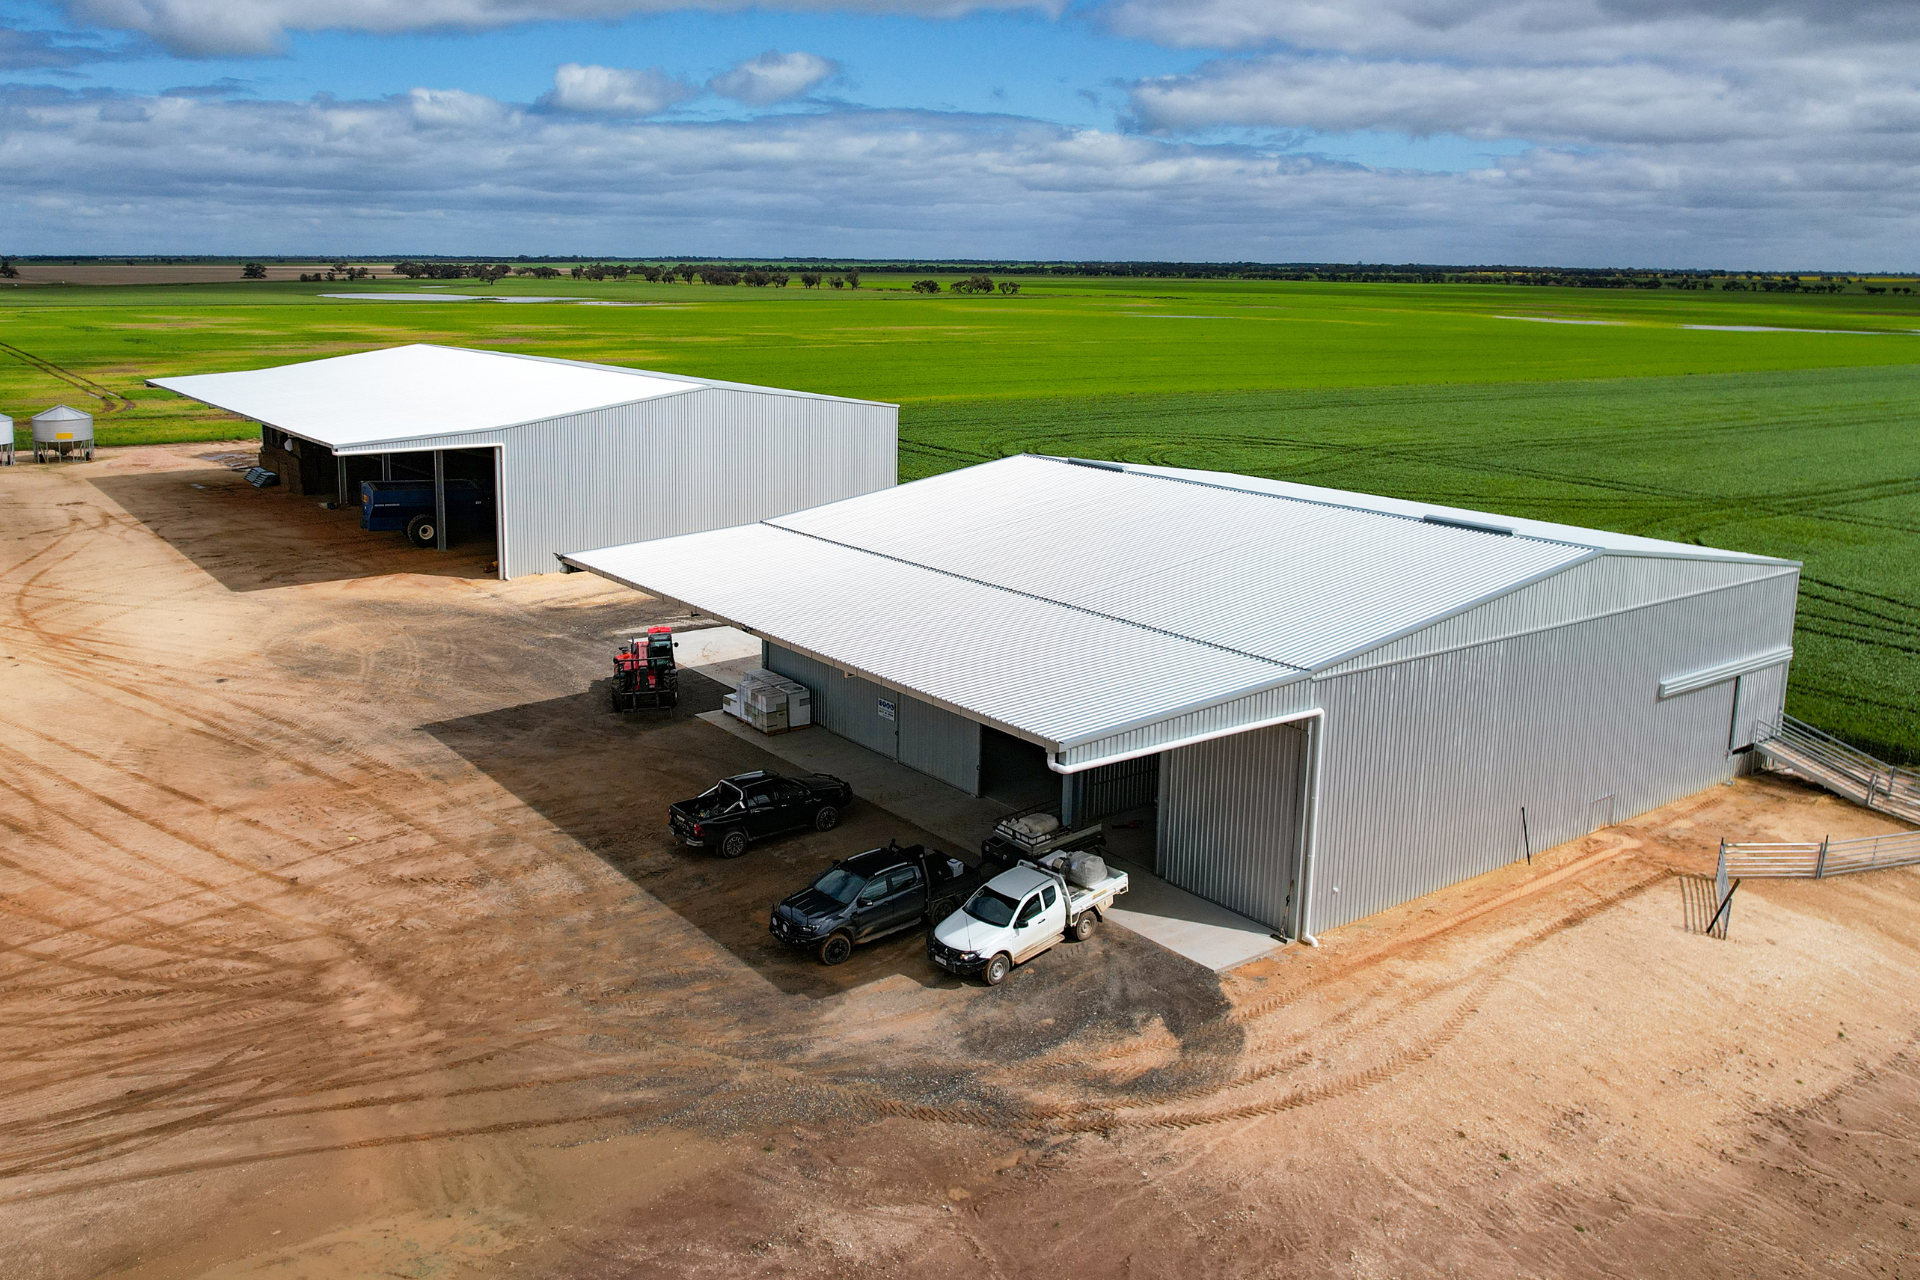 A 24m x 24m x 6.75m shed with an 8-metre canopy at Cannum